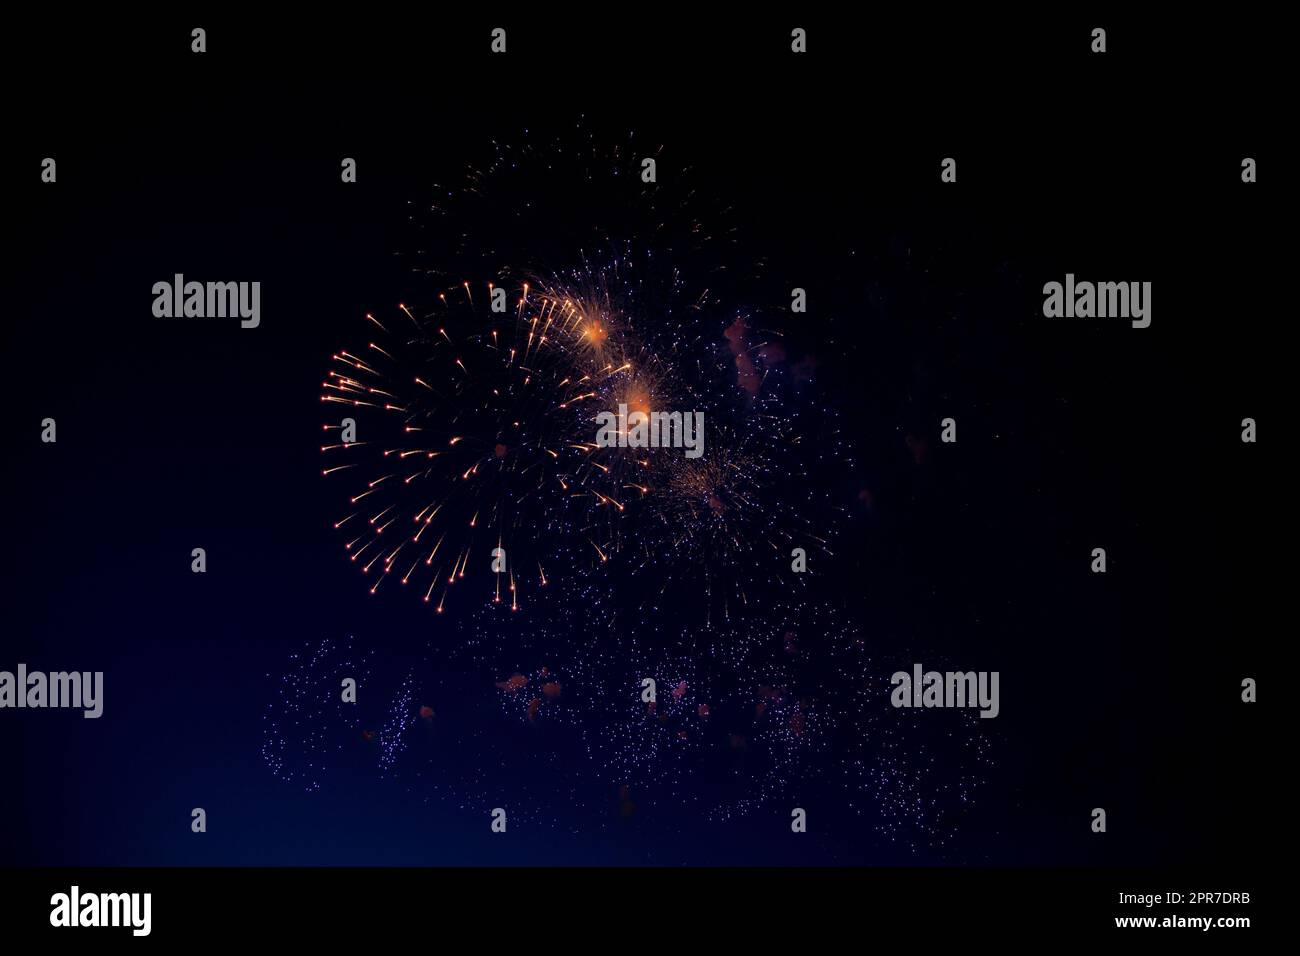 Bright orange fireworks and lots of blue and purple sparks on the background of the night sky Stock Photo